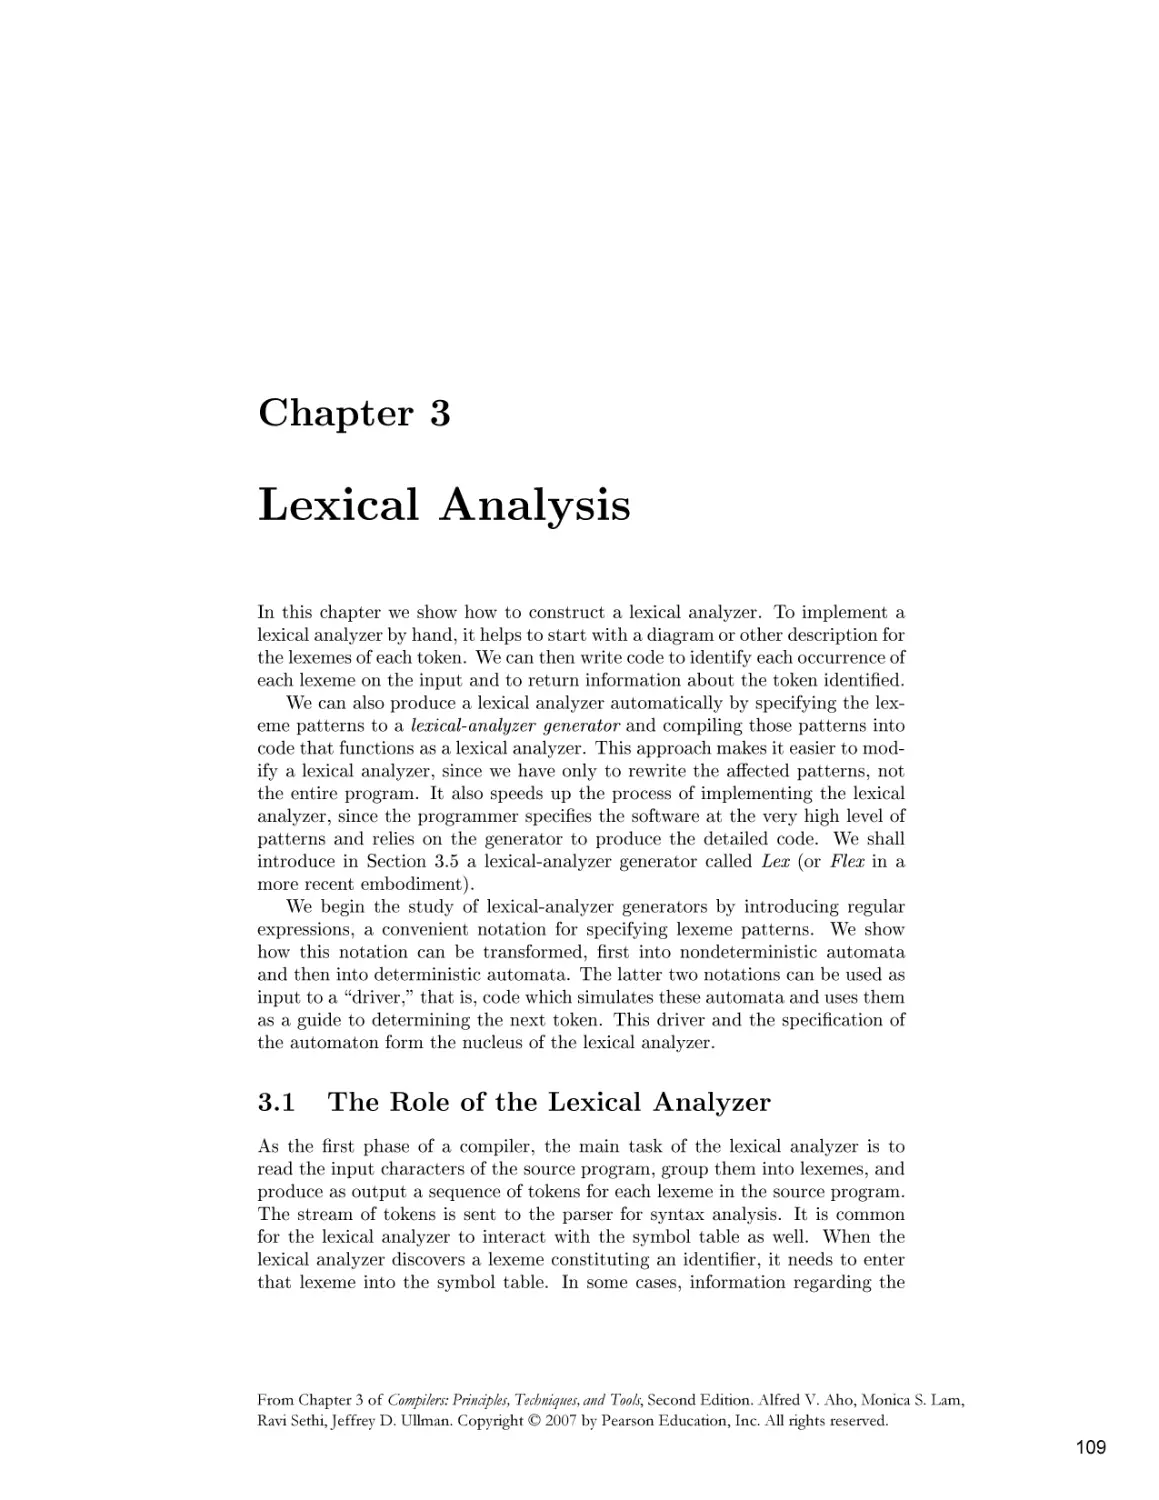 Chapter 3. Lexical Analysis